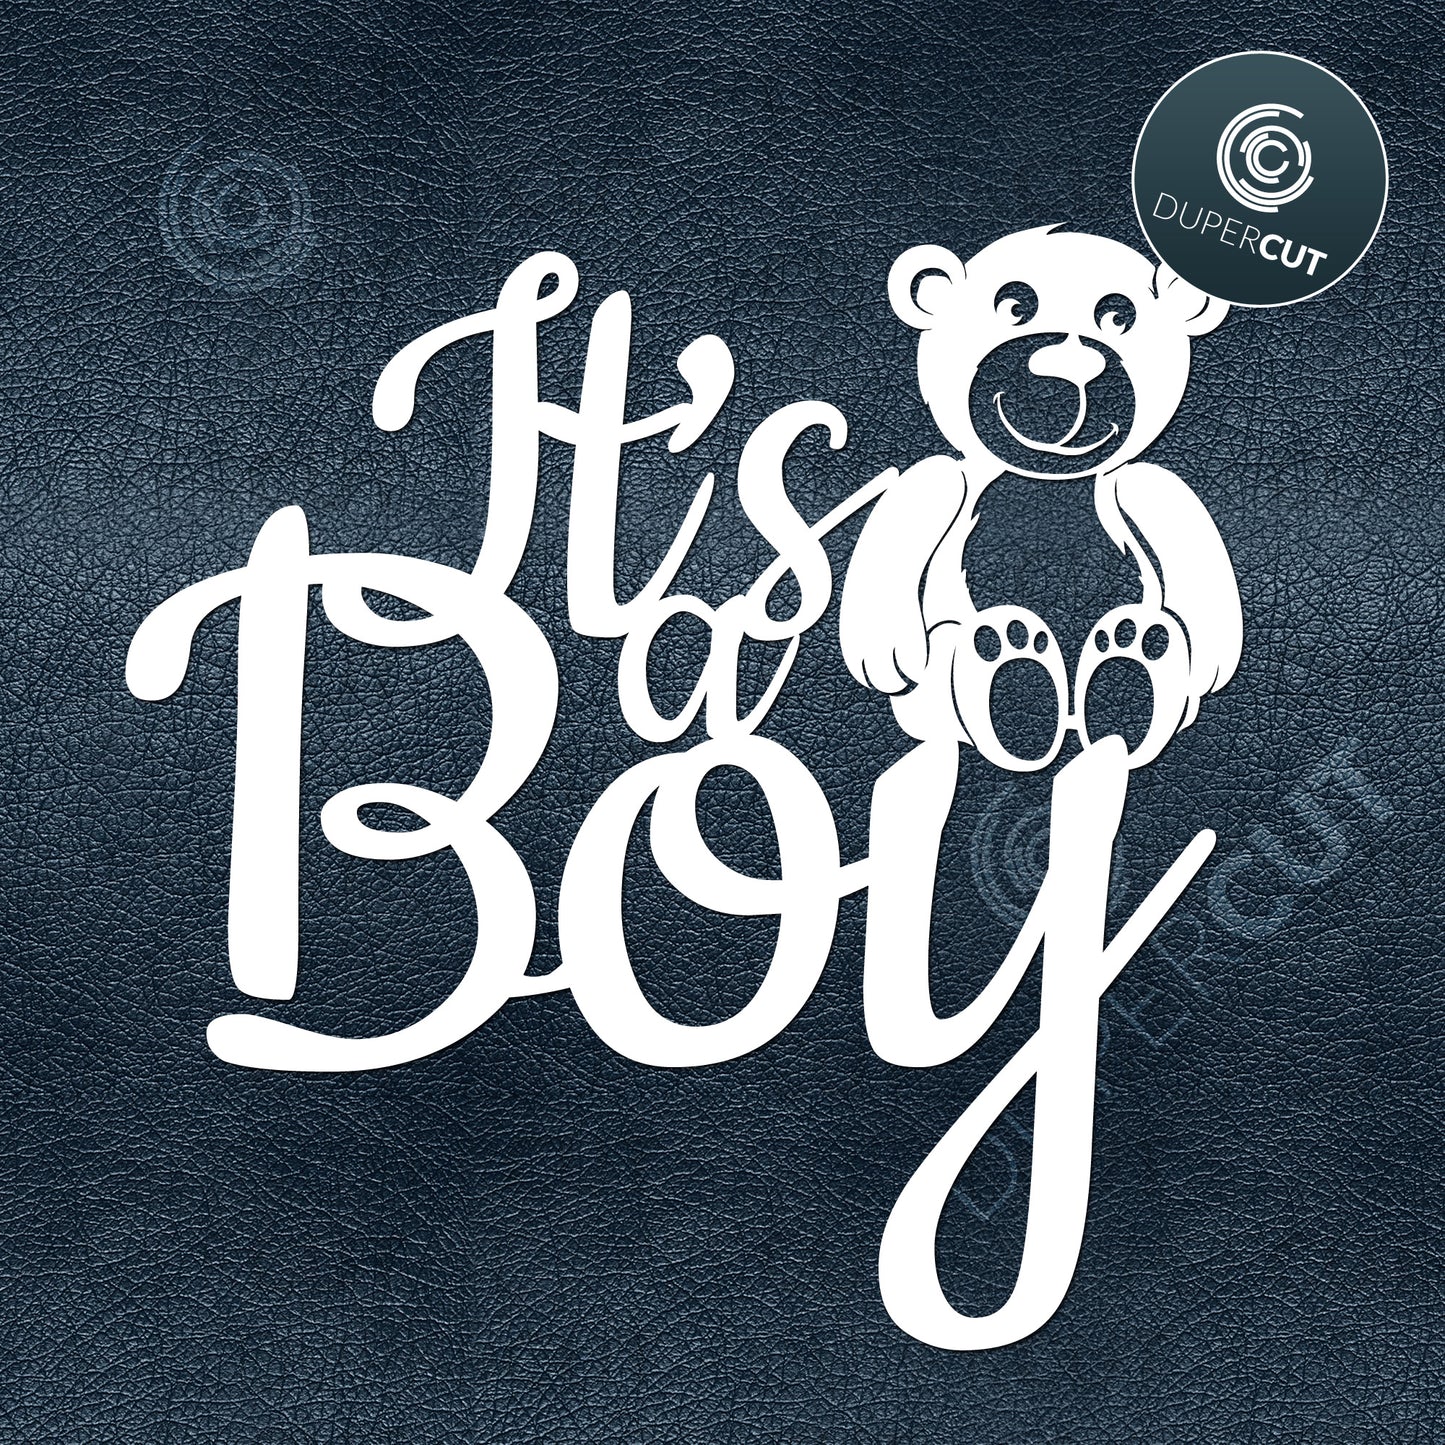 It's a boy sign. Cake topper for baby shower. Papercutting template for commercial use. SVG files for Silhouette Cameo, Cricut, Glowforge, DXF for CNC, laser cutting, print on demand